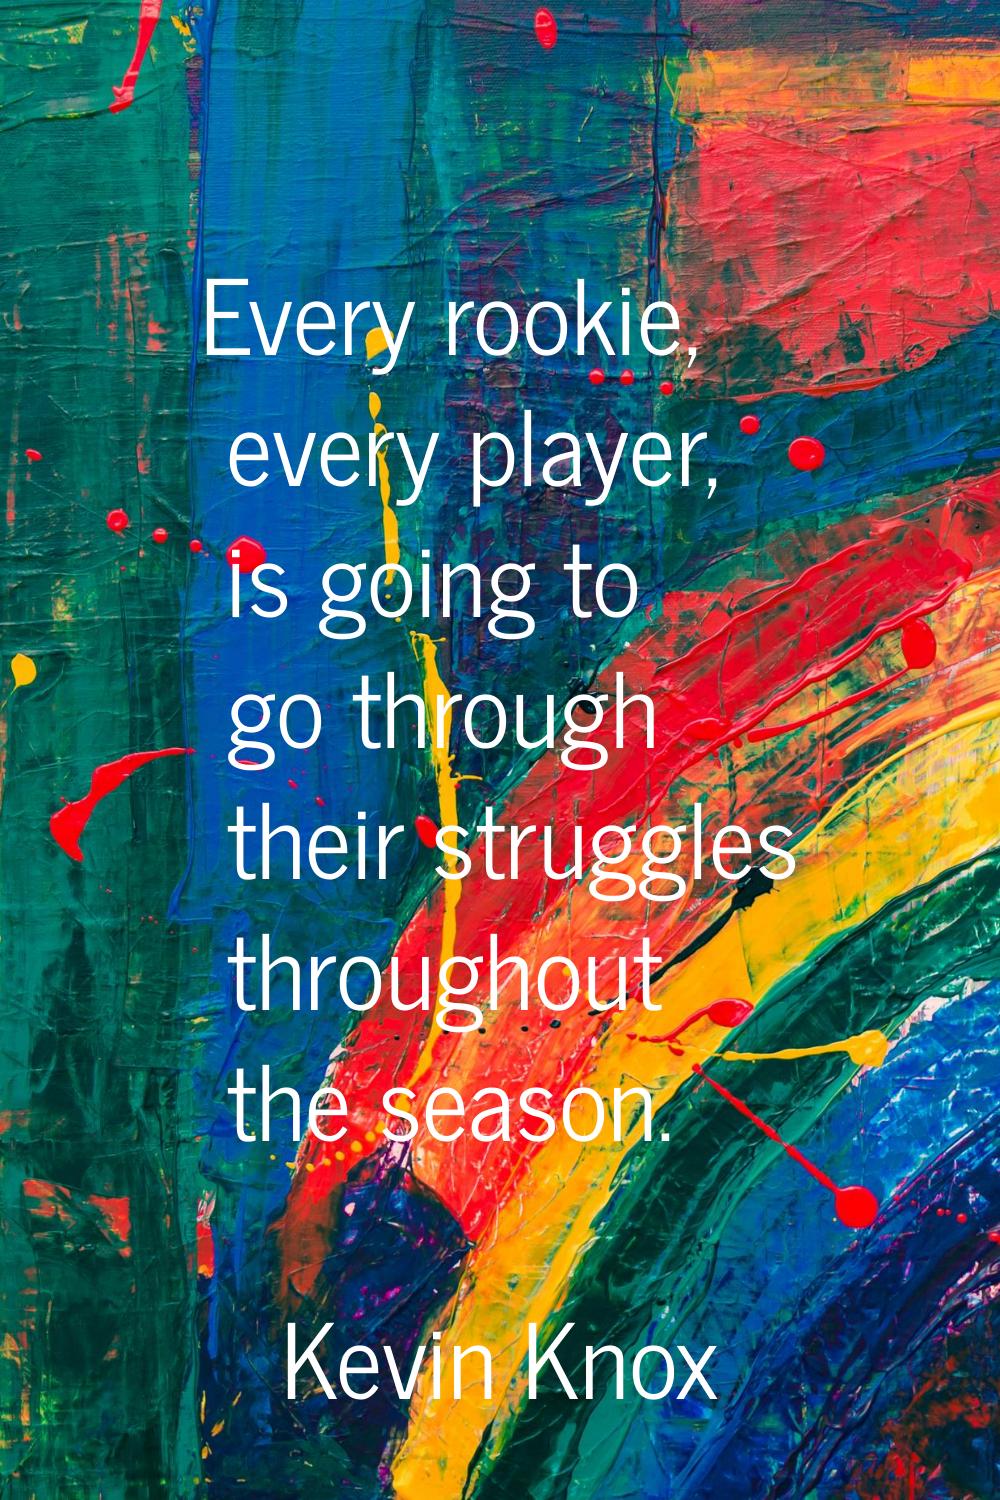 Every rookie, every player, is going to go through their struggles throughout the season.